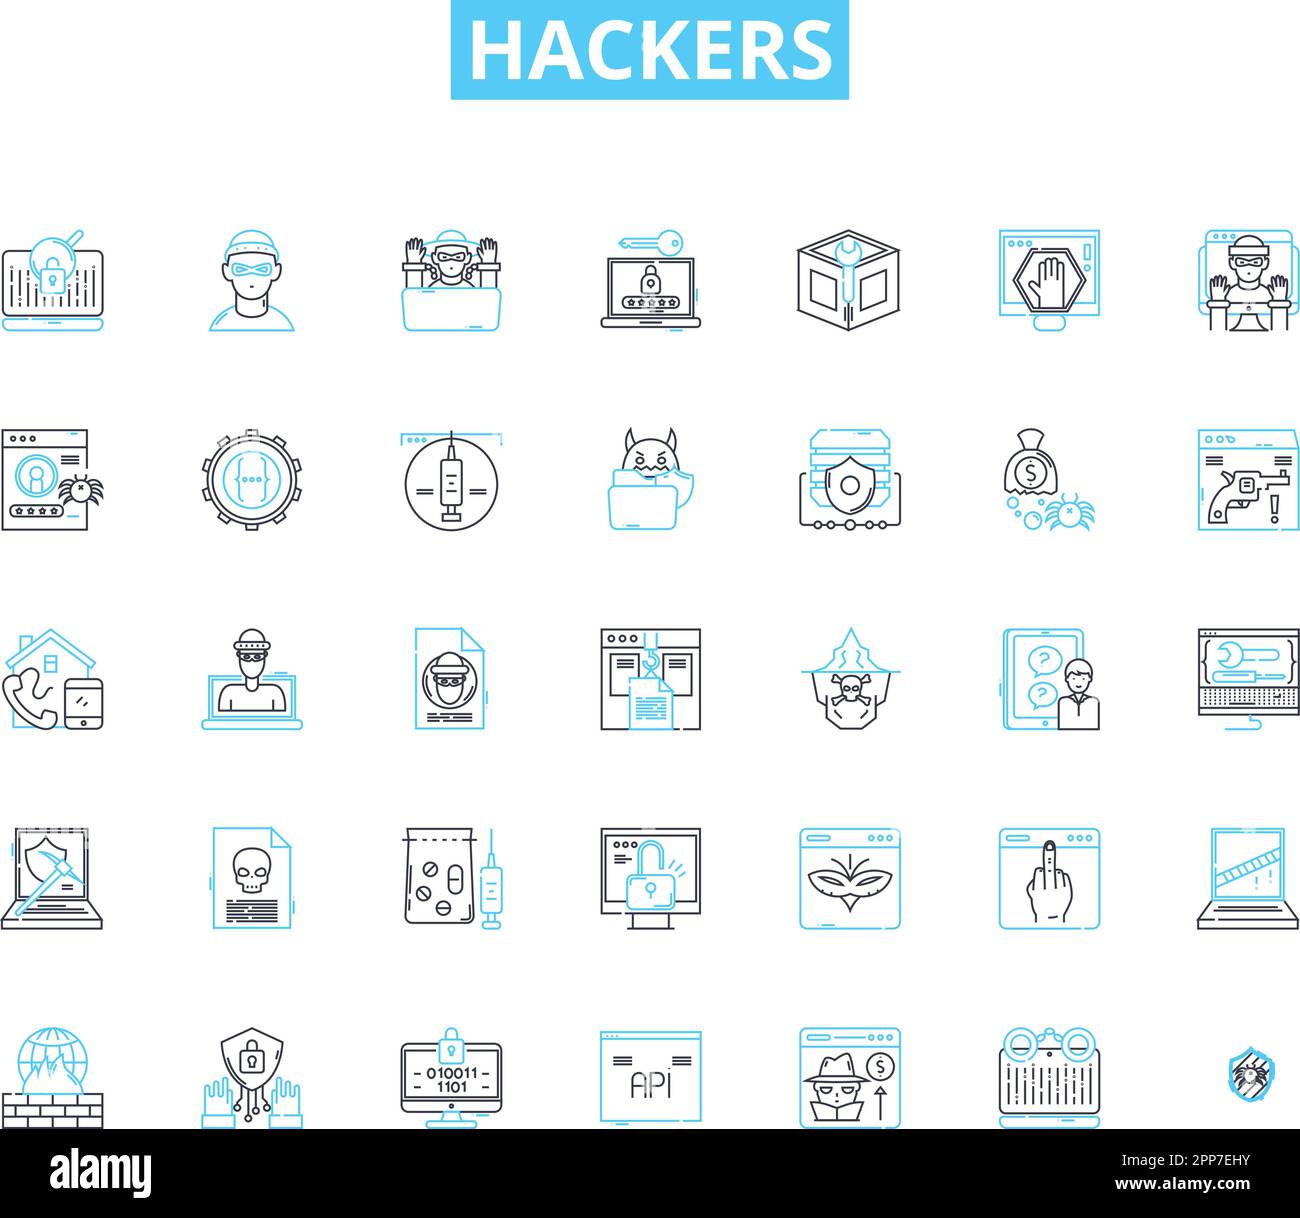 Hackers linear icons set. Cybercriminals, Intruders, Crackers, Hacktivists, Black hats, White hats, Rogue line vector and concept signs. Spies Stock Vector